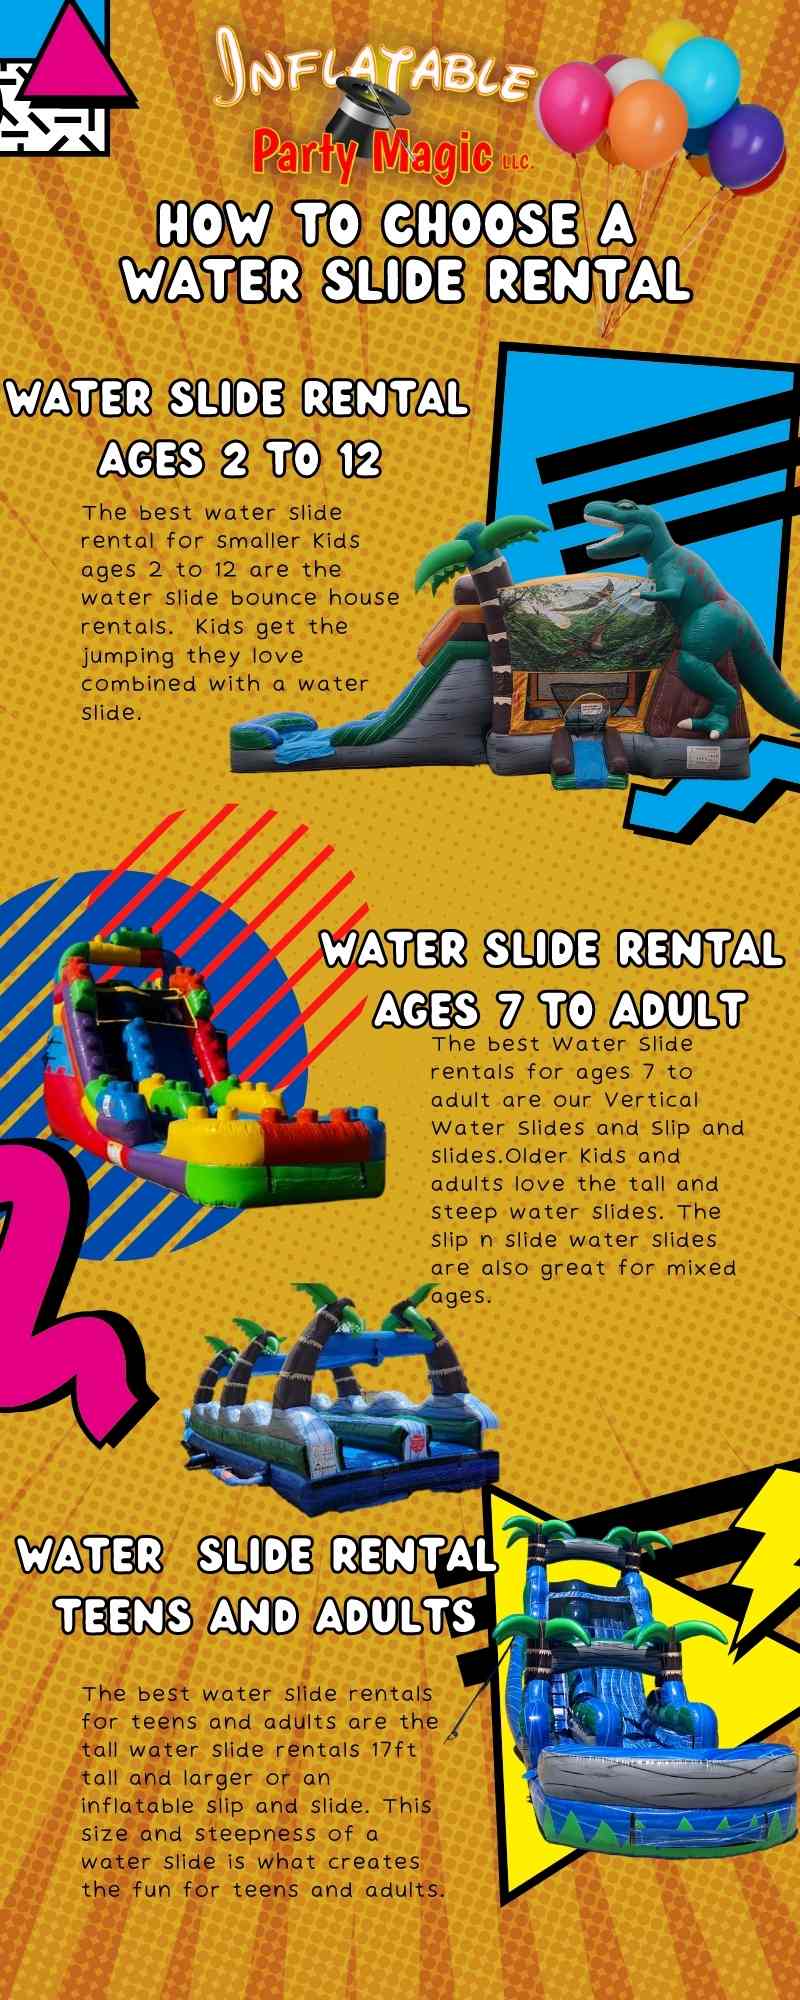 How to Choose a Water Slide Rental by age